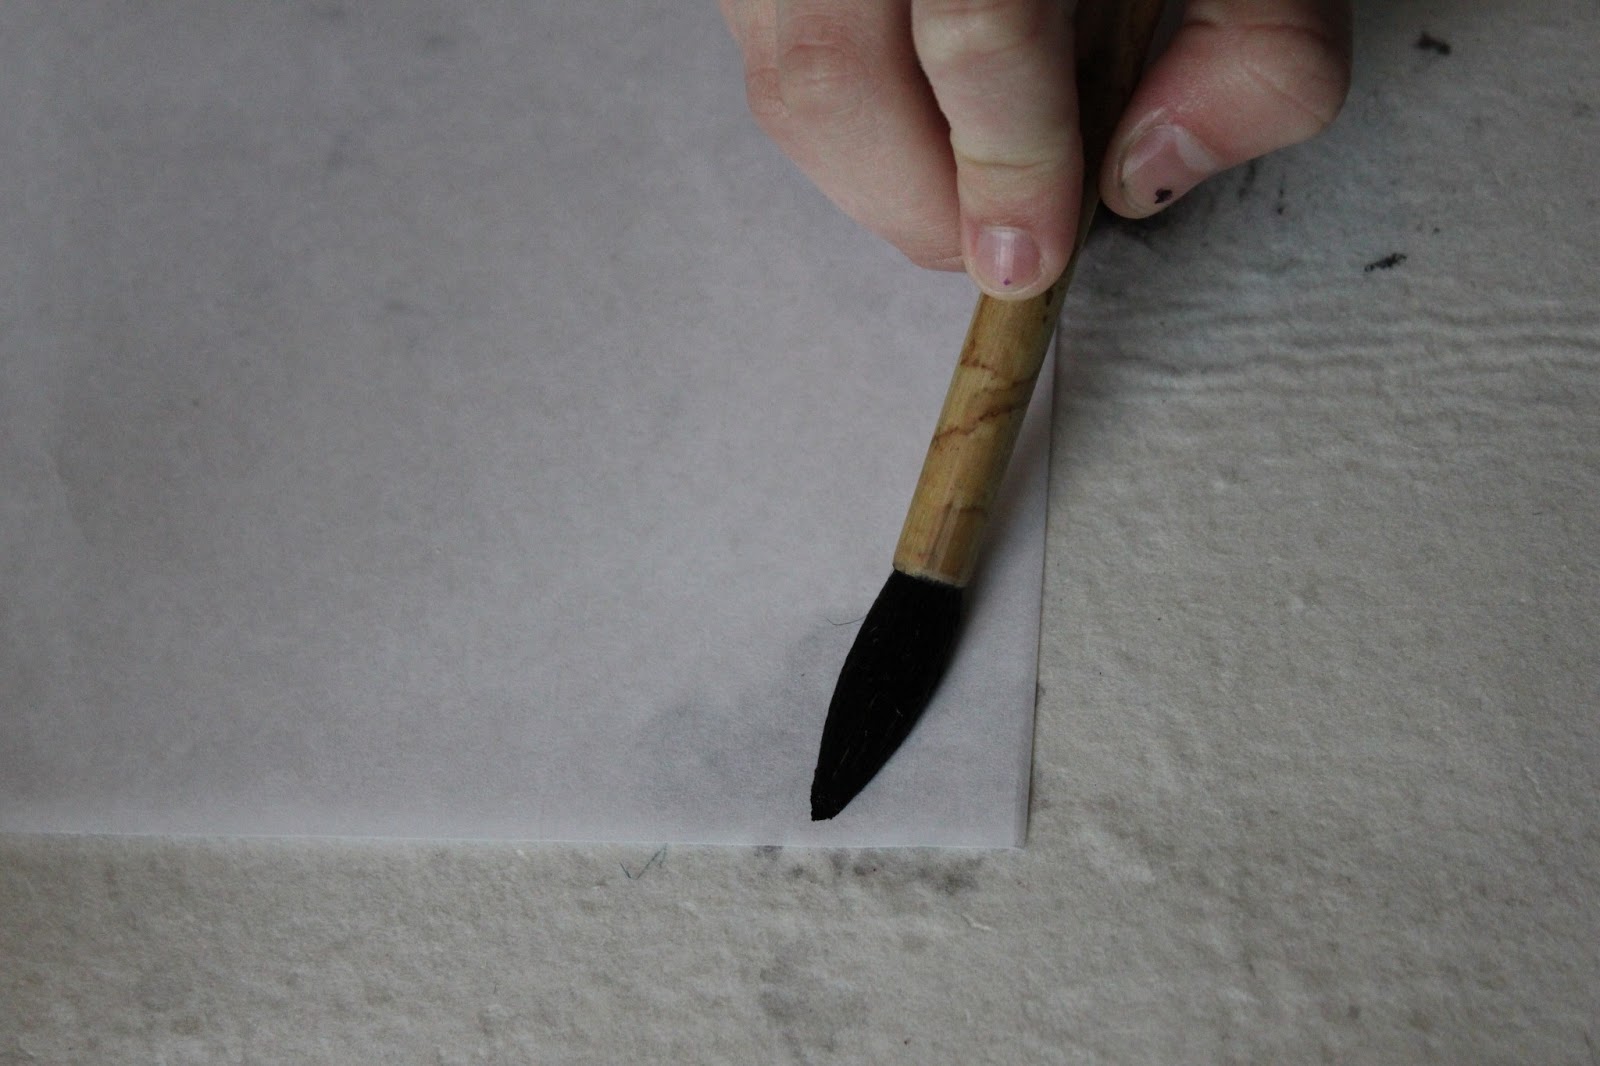 ... the brush to the paper and press down to form a slightly oval shape